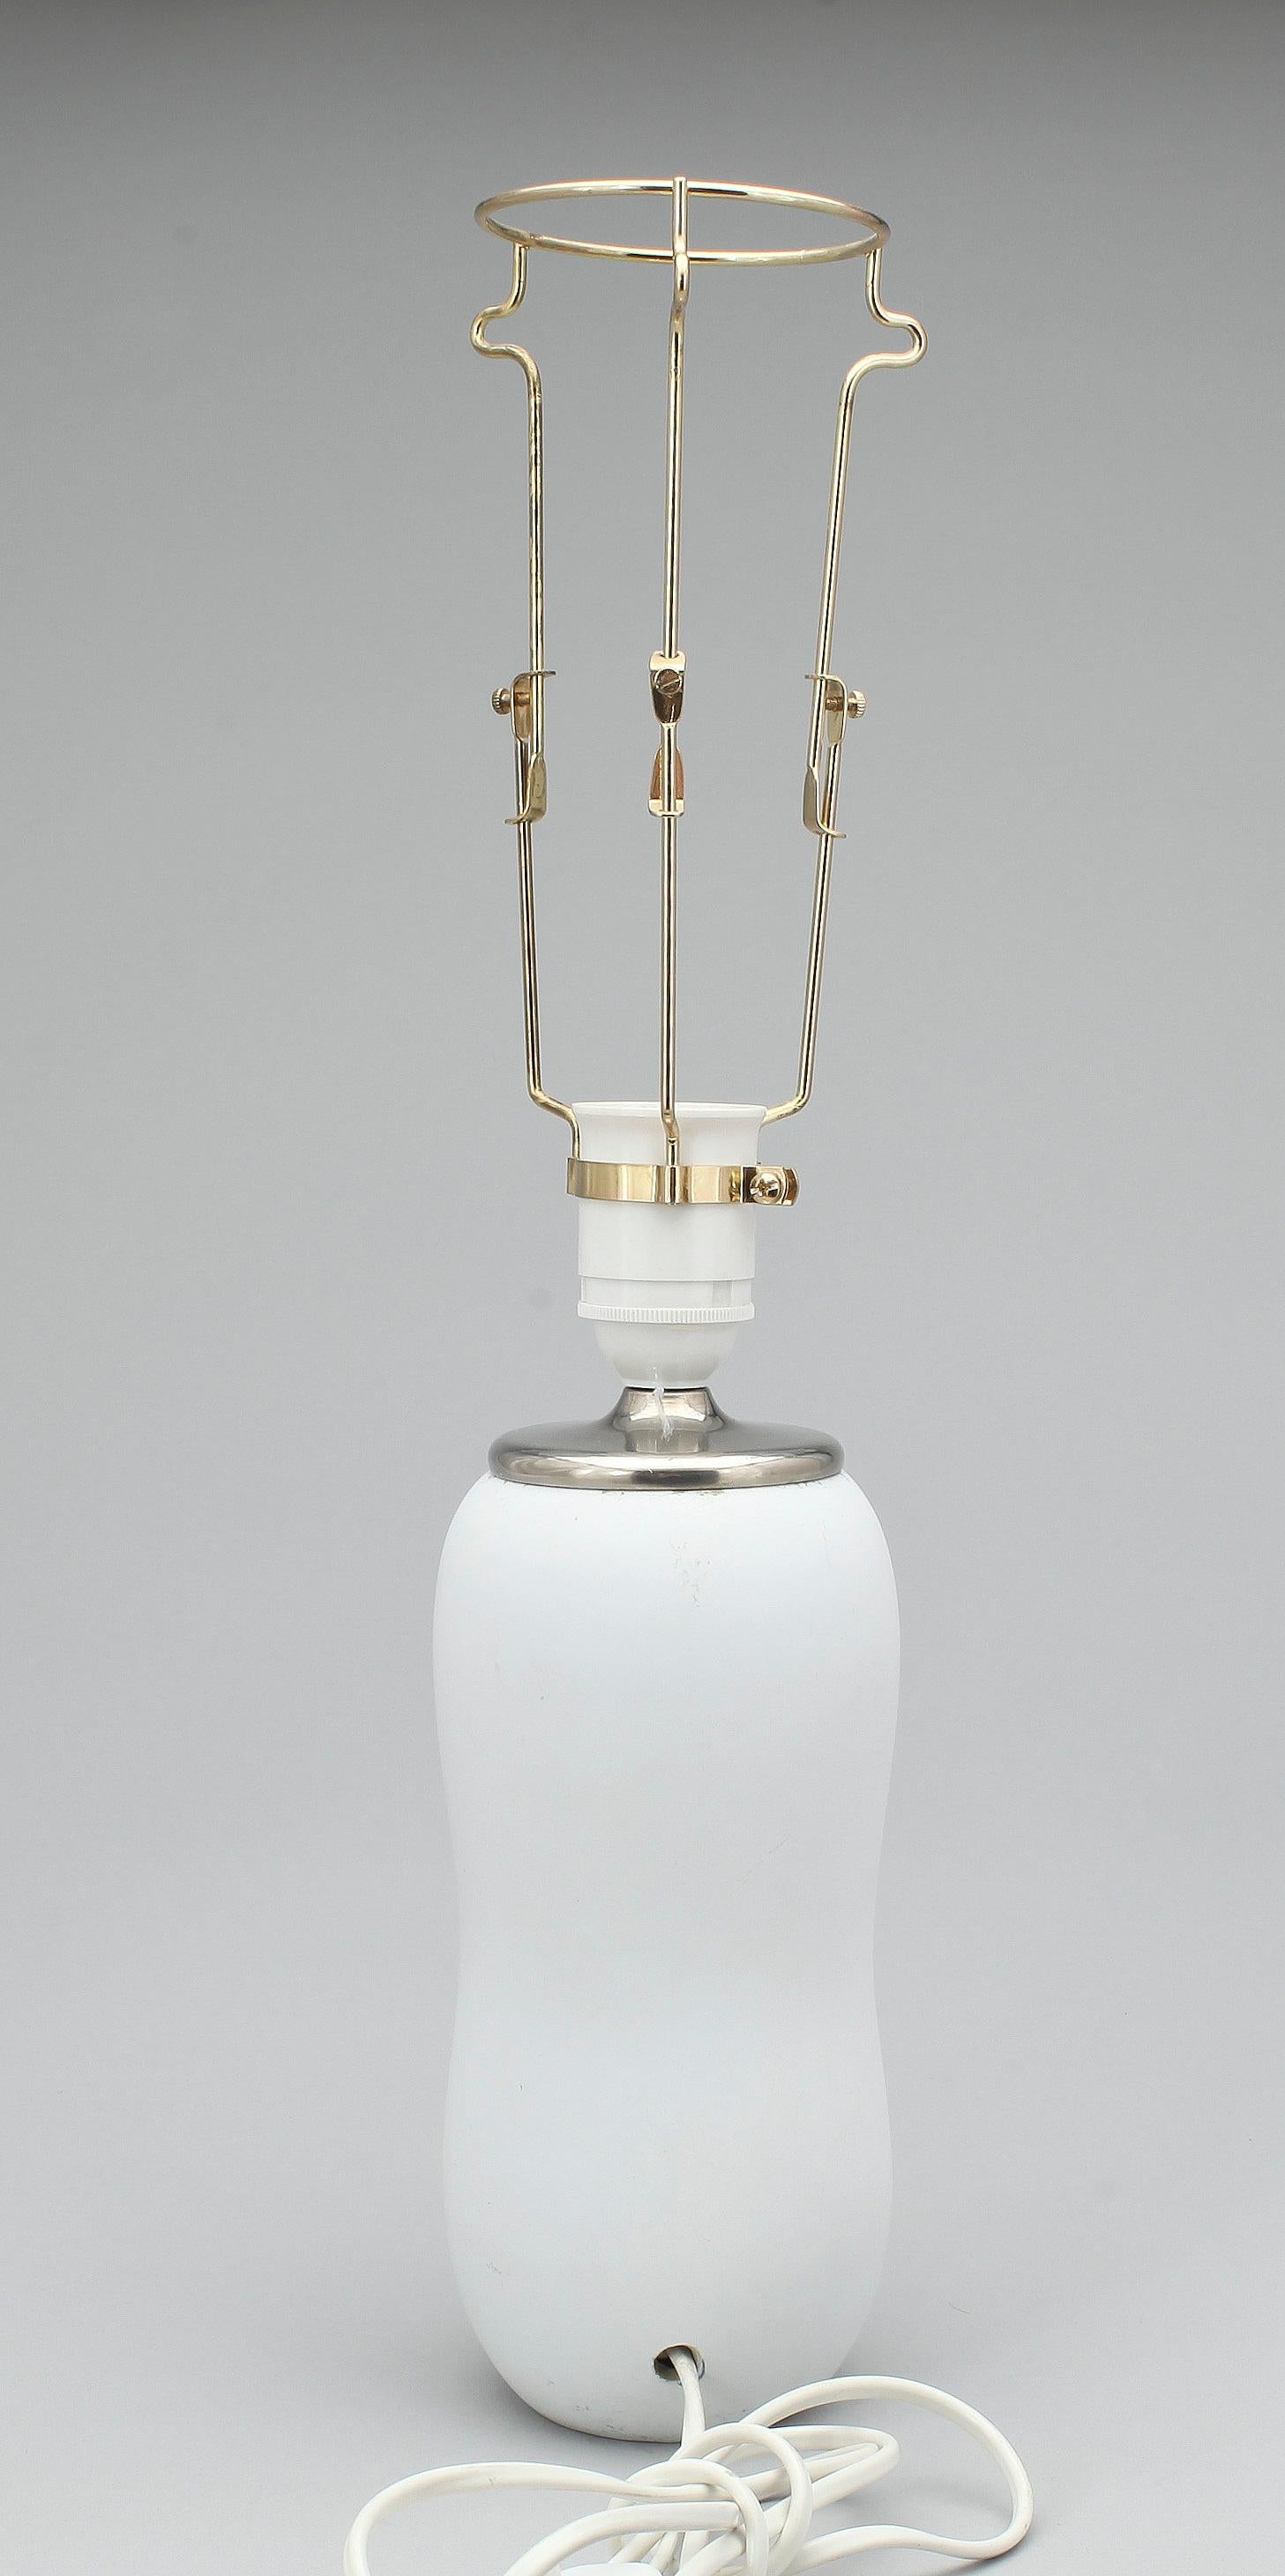 Table lamp by Stig lindberg model from serie Grazia